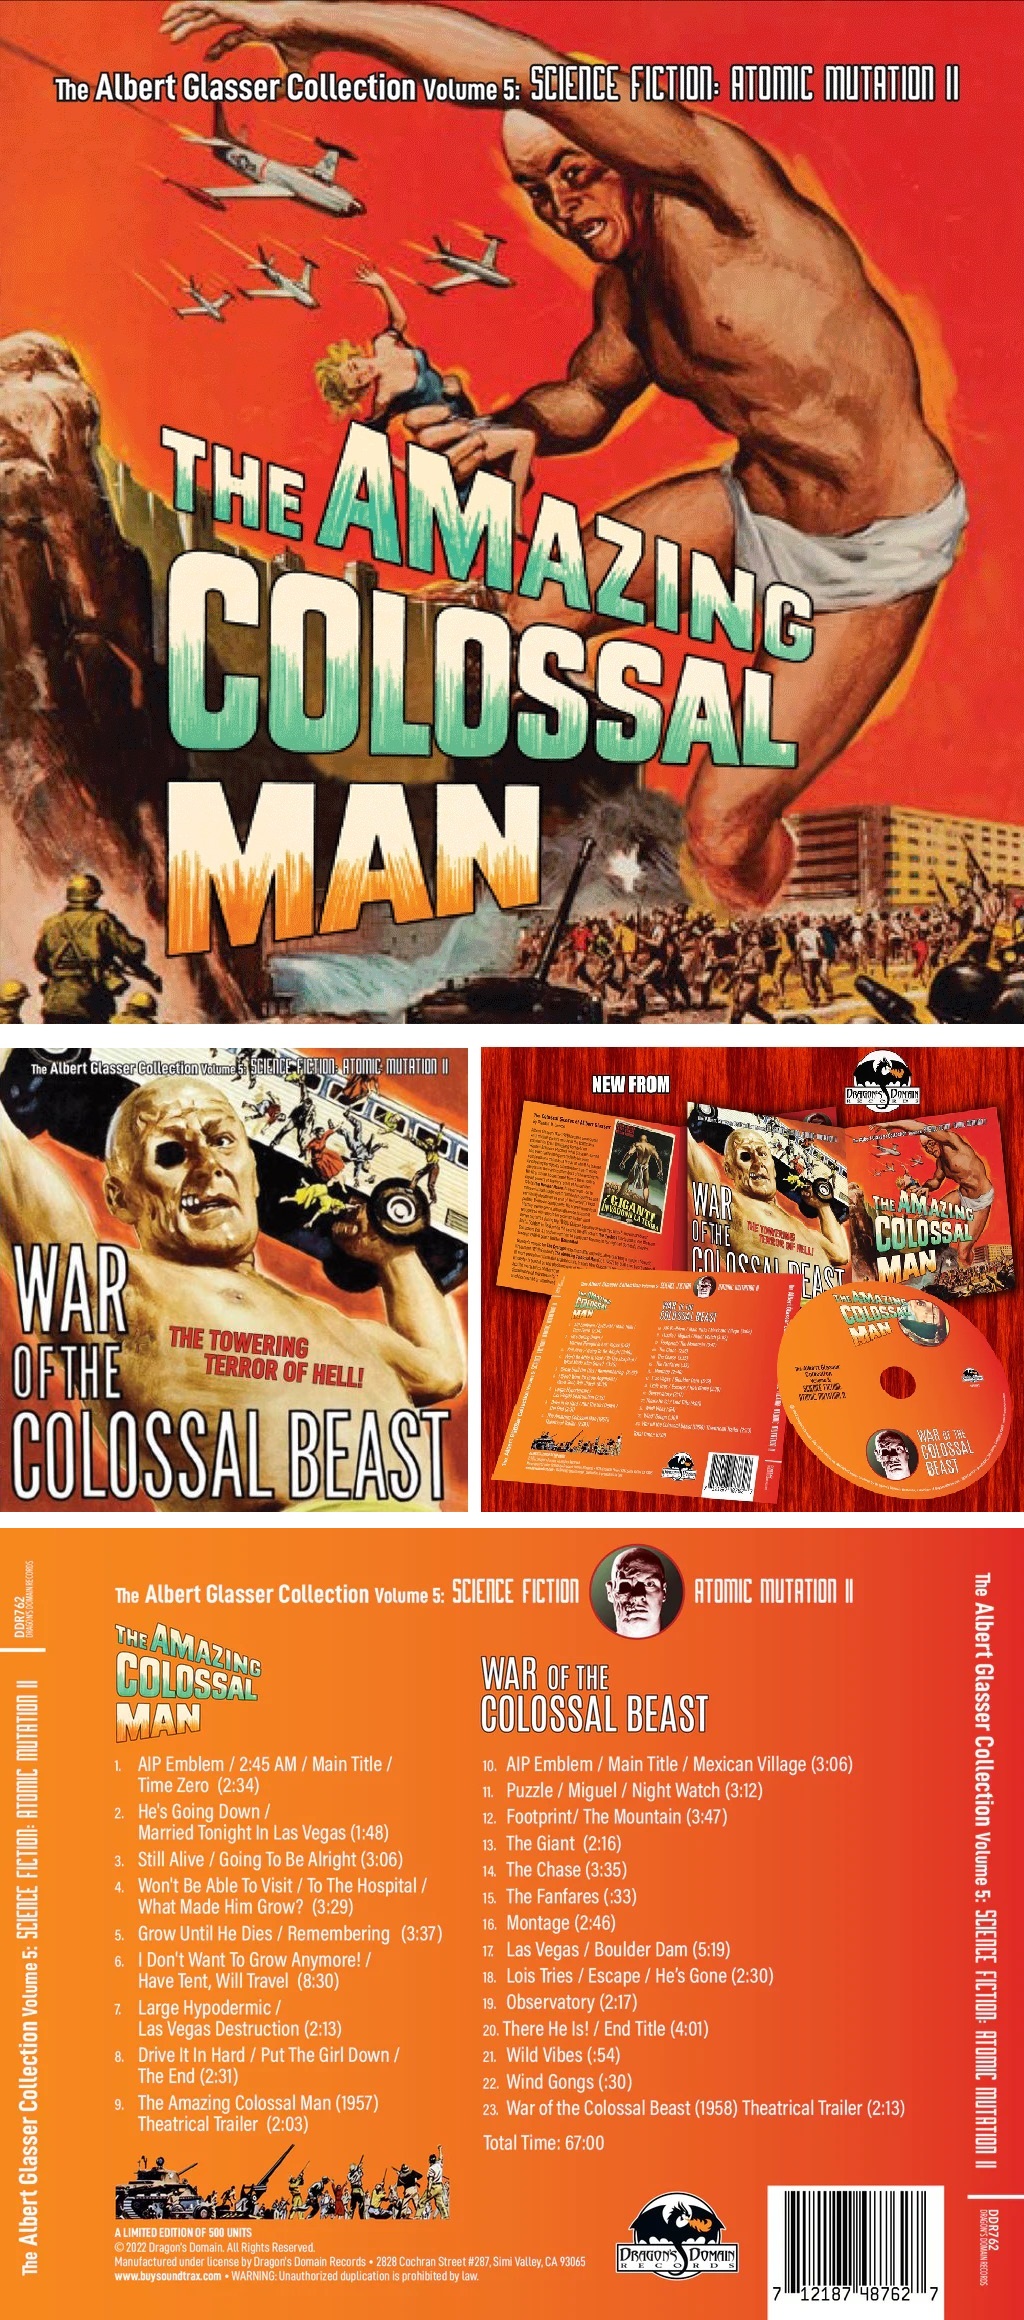 The Albert Glasser Collection Vol. 5 - The Amazing Colossal Man / War Of The Colossal Beast